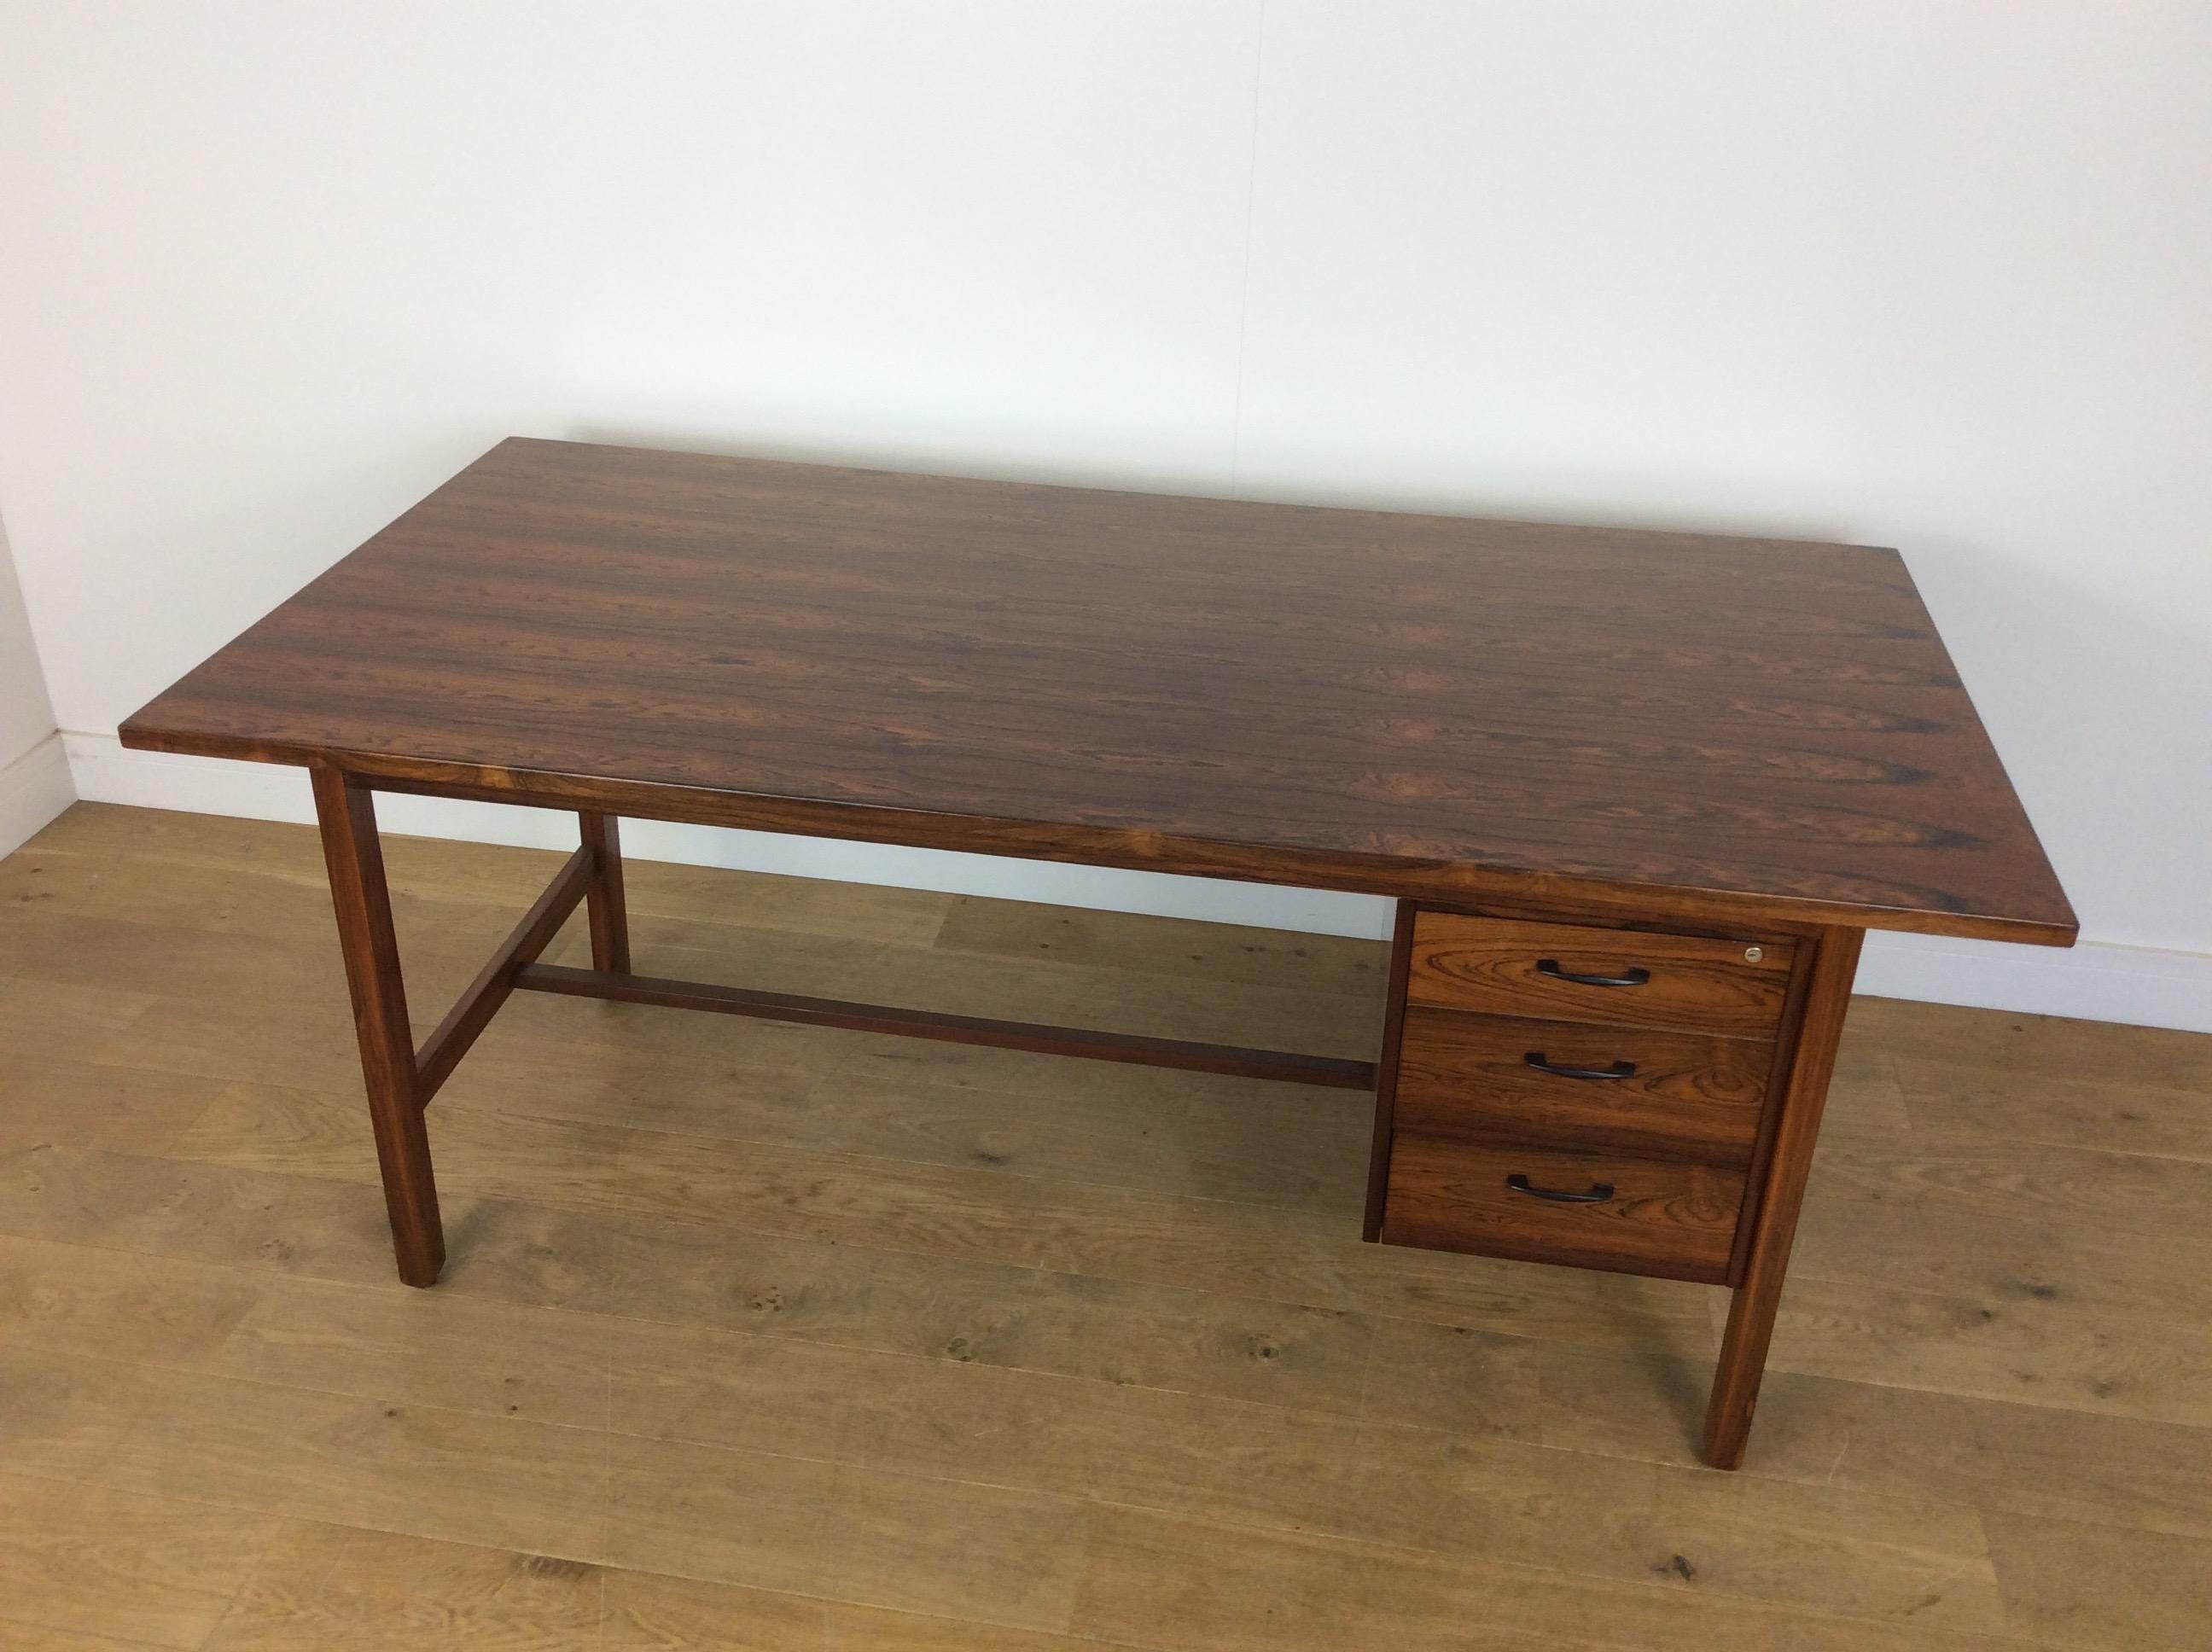 Midcentury desk.
Midcentury desk in beautiful rosewood,
open plan with a bank of three drawers to the right.
SB Feldballes Møbelfabrik.
Measures: 74 cm H, 180 cm W, 90 cm D
Danish, circa 1960.